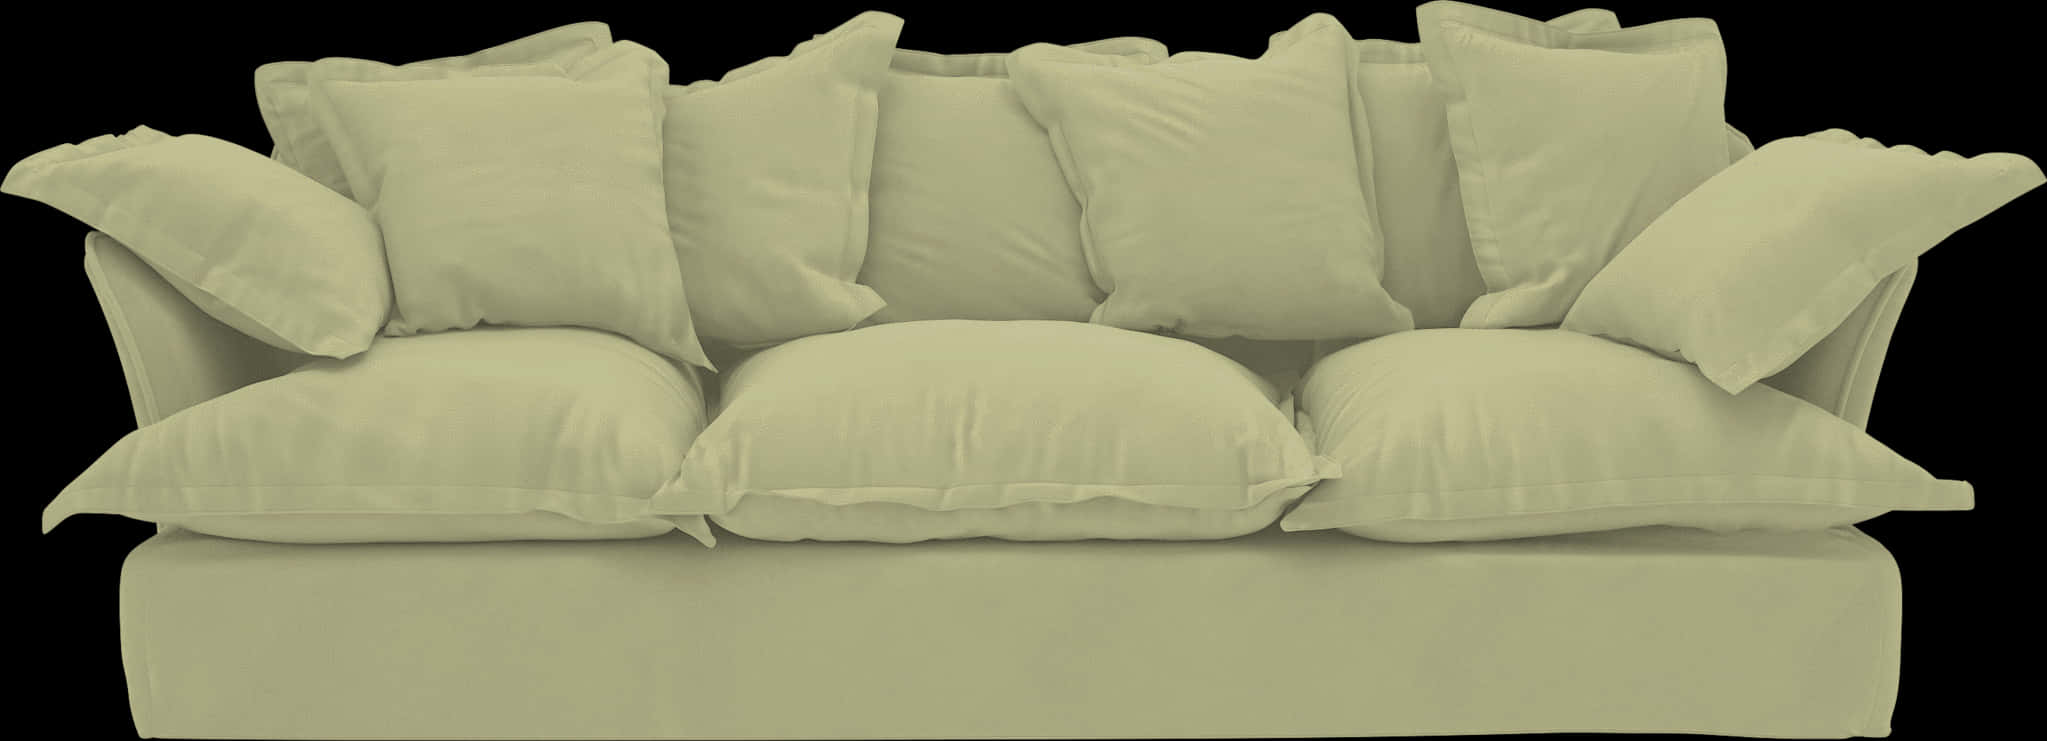 Plush Beige Couch With Pillows PNG image